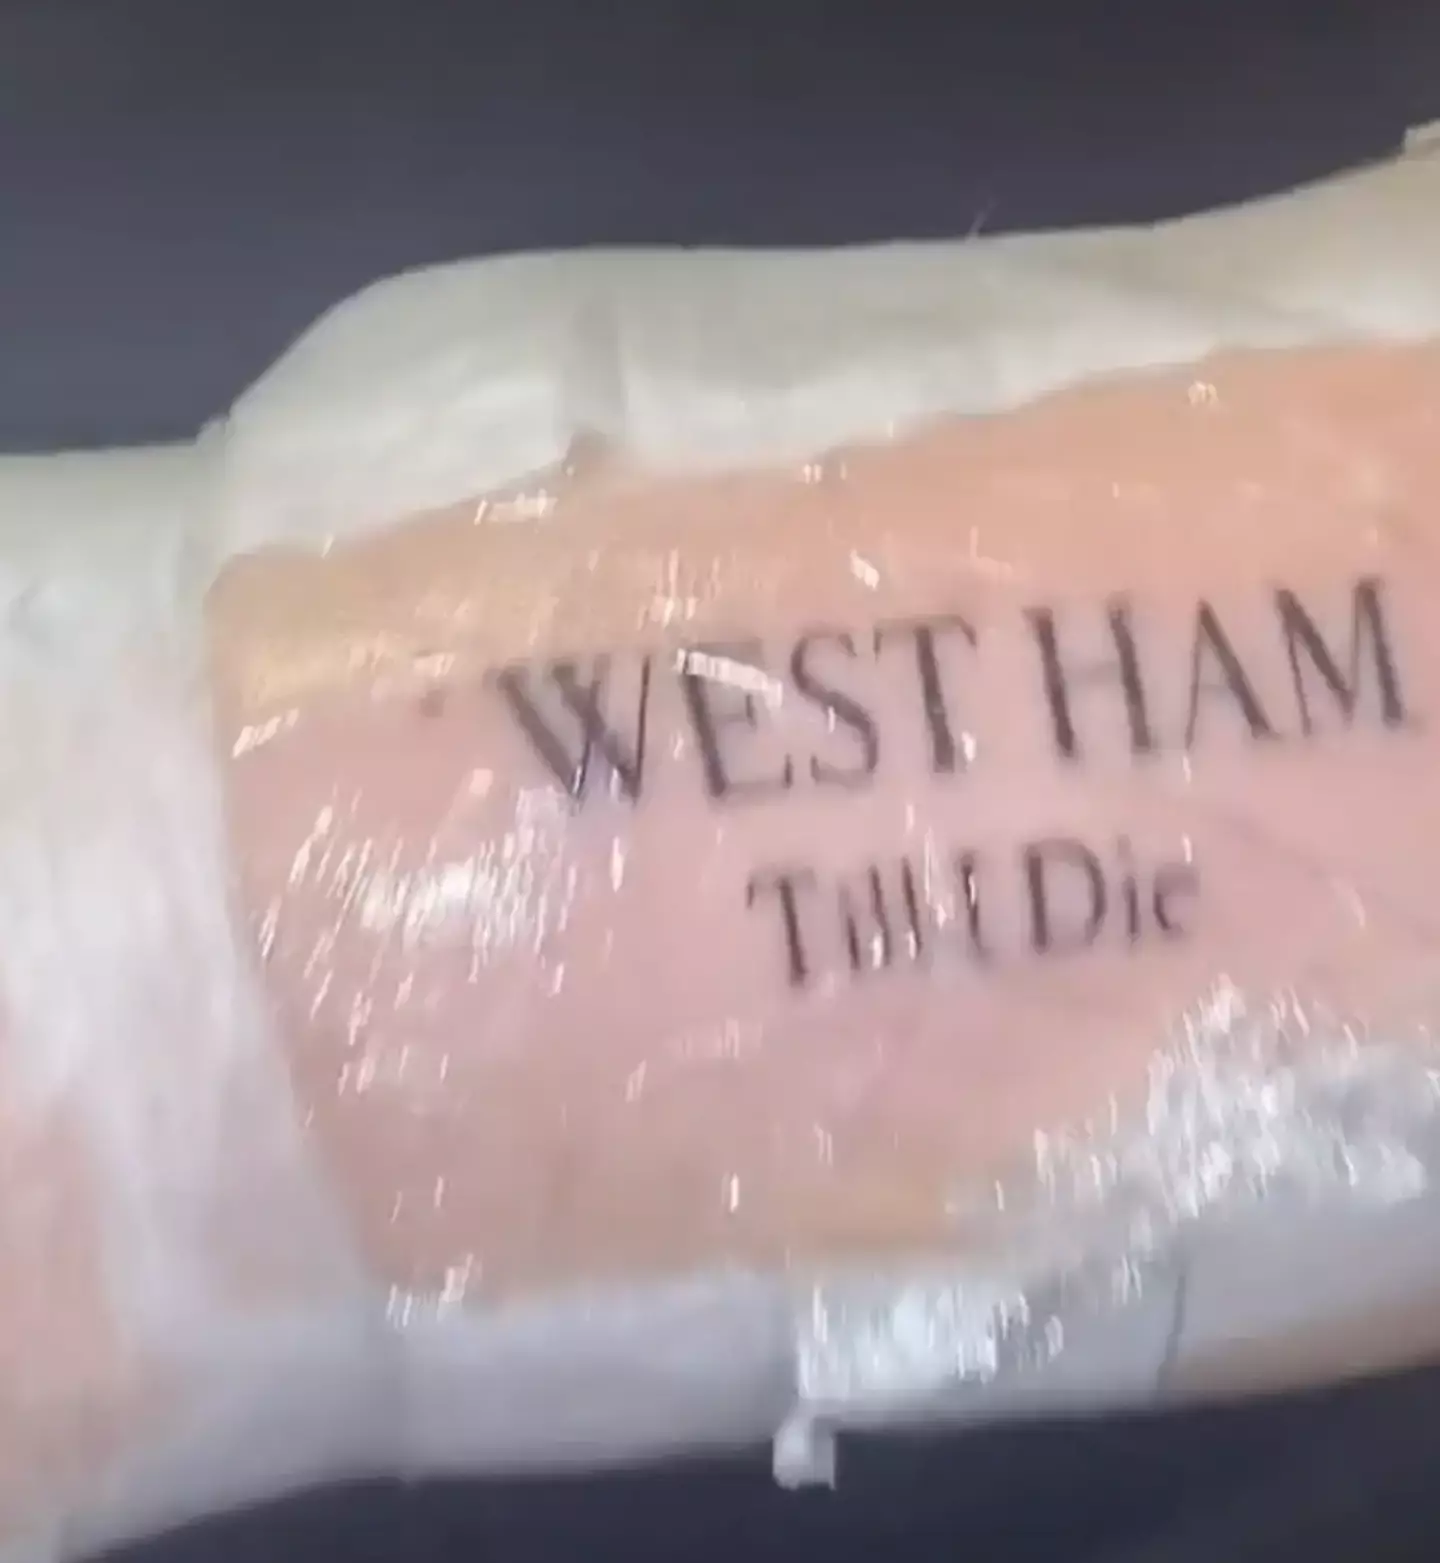 Candy got ‘WEST HAM Till I Die’ permanently etched into her skin.